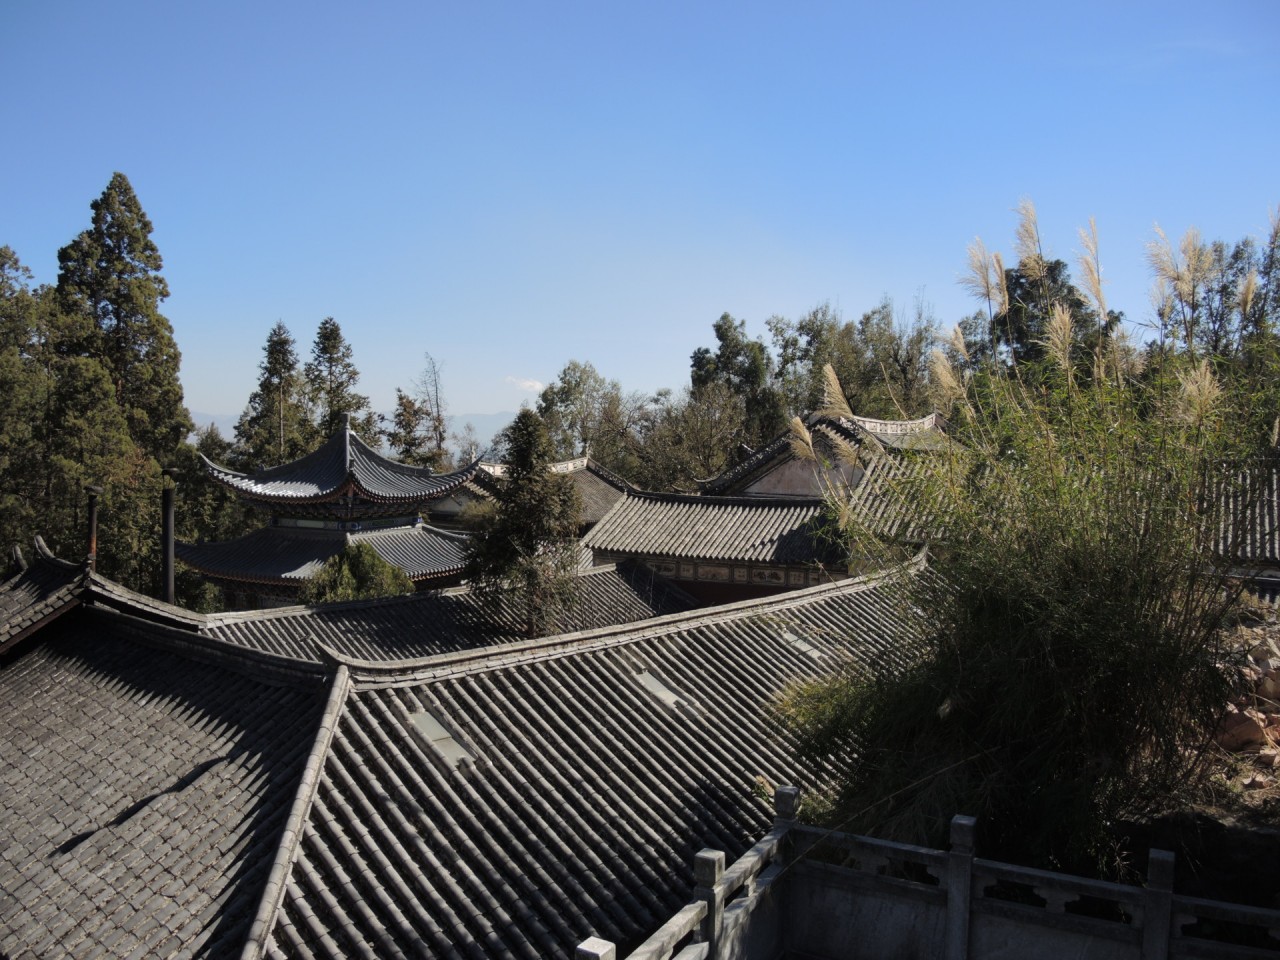 Wu Wei Si - Roofs